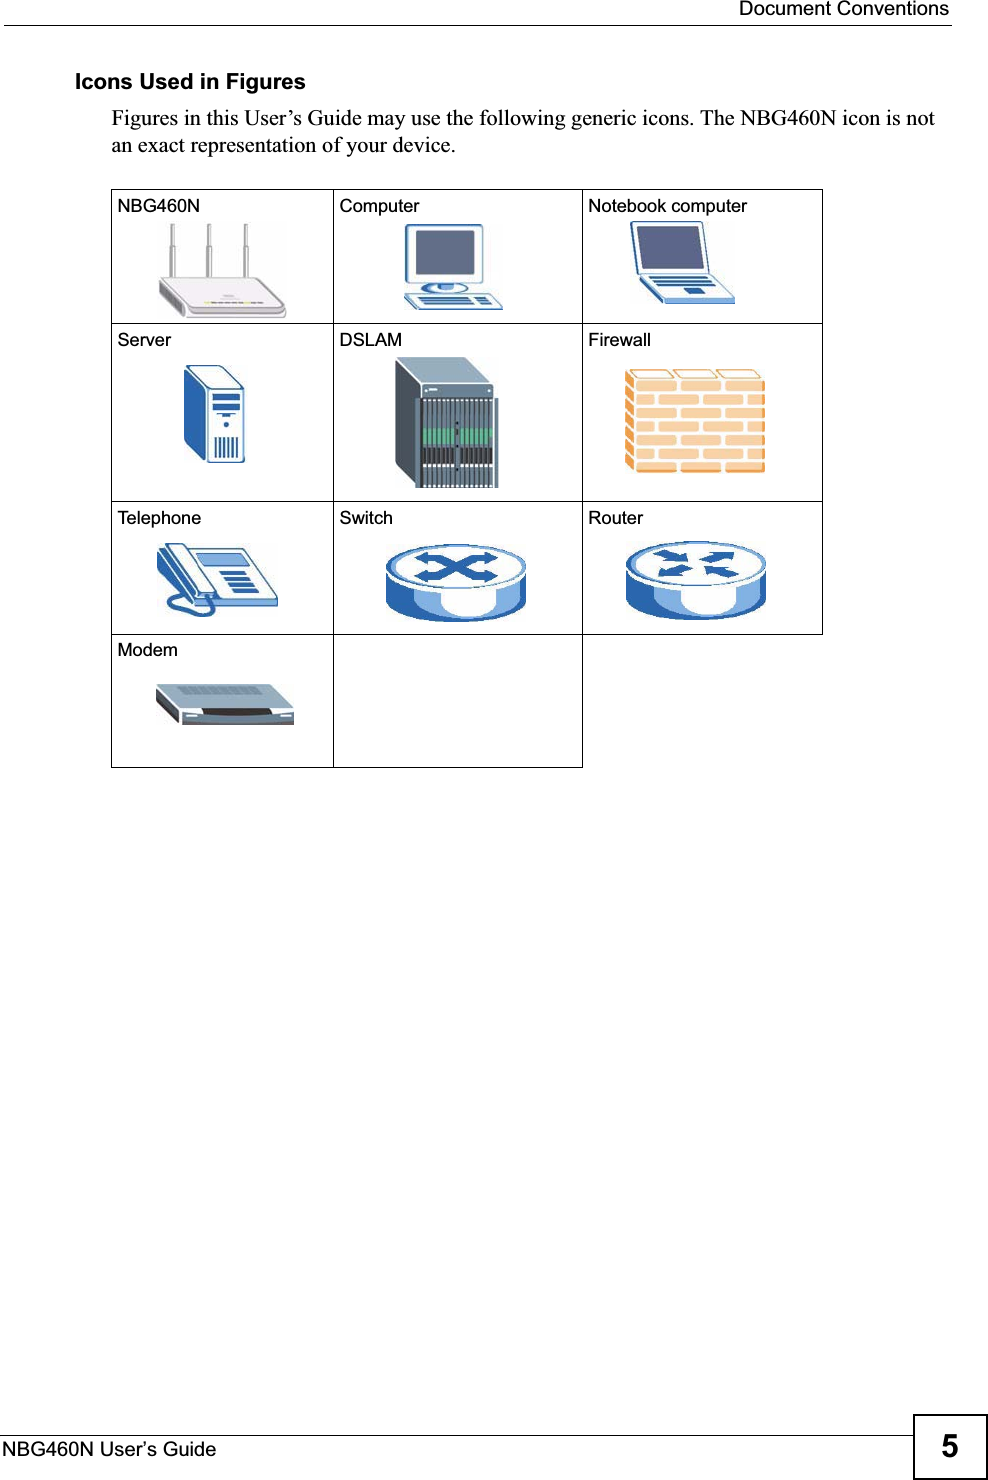  Document ConventionsNBG460N User’s Guide 5Icons Used in FiguresFigures in this User’s Guide may use the following generic icons. The NBG460N icon is not an exact representation of your device.NBG460N Computer Notebook computerServer DSLAM FirewallTelephone Switch RouterModem